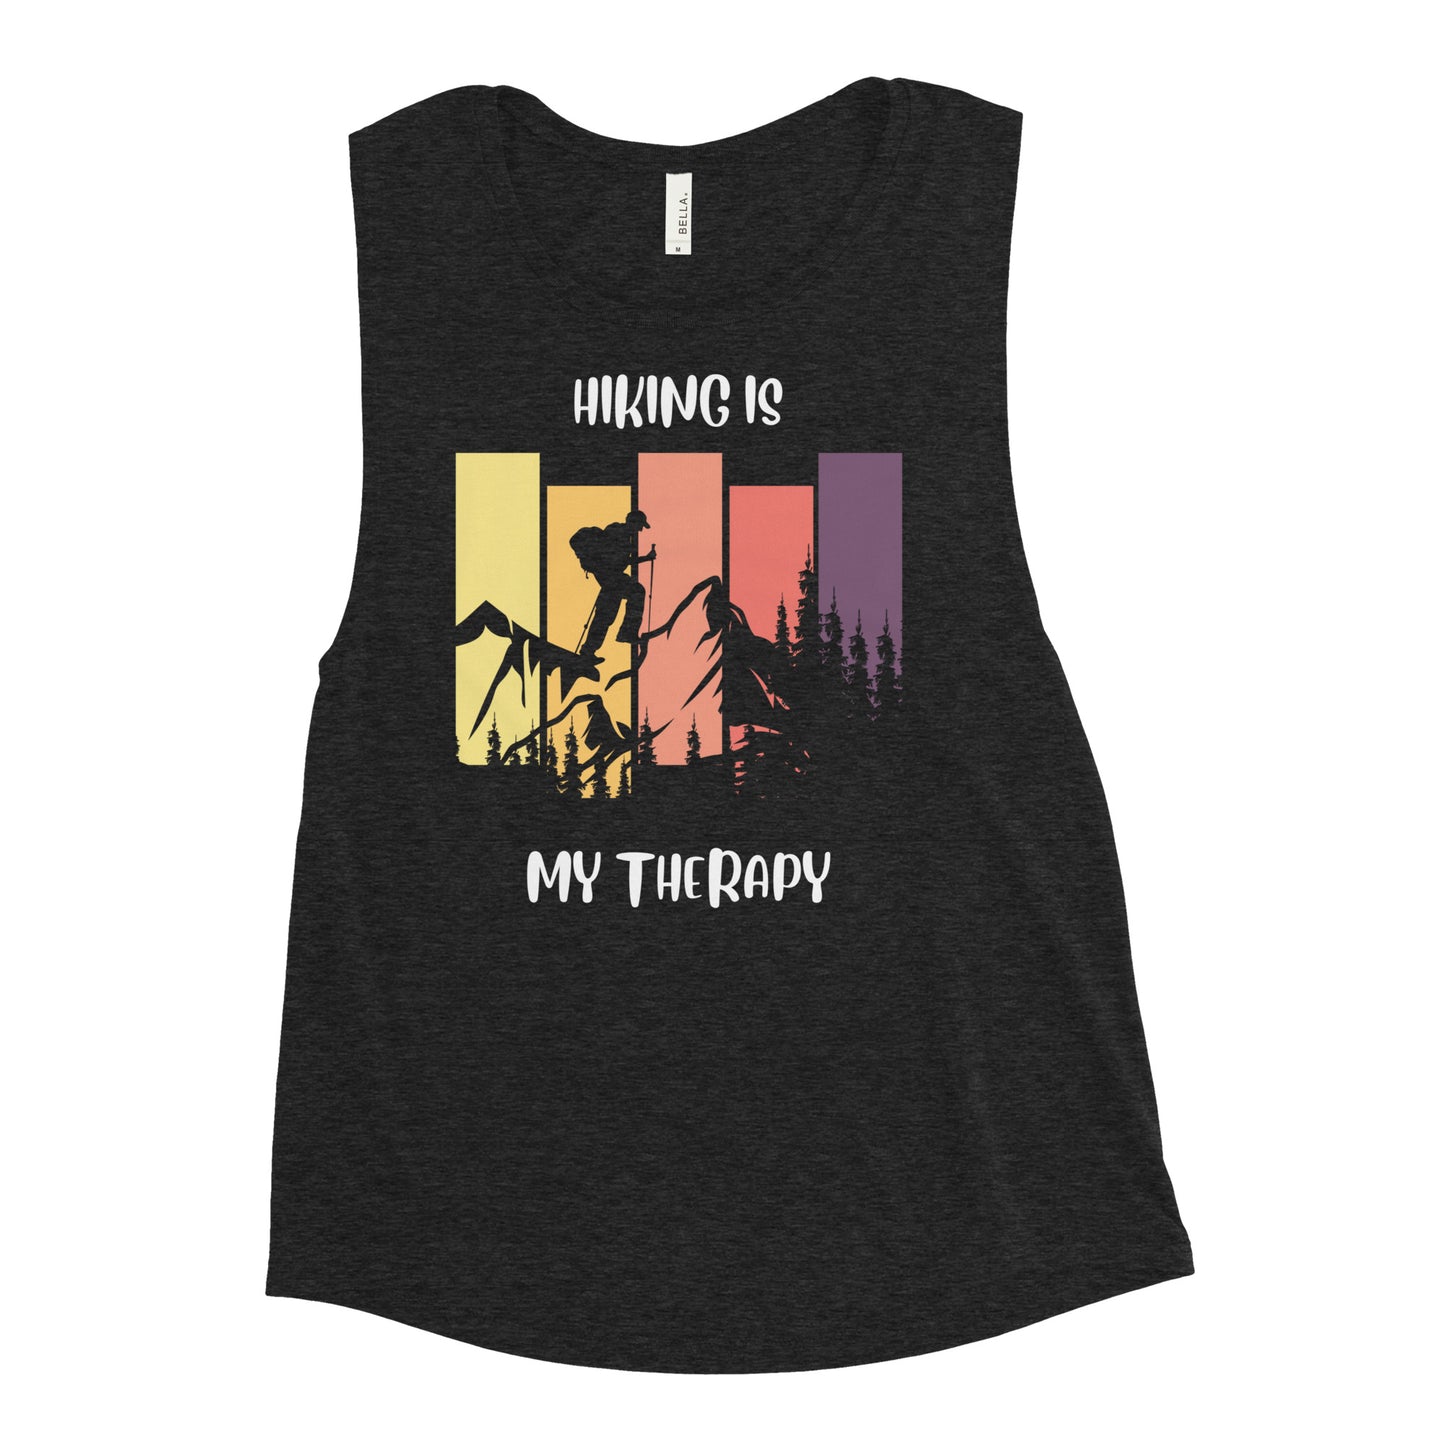 Hiking is my Therapy - Ladies’ Muscle Tank